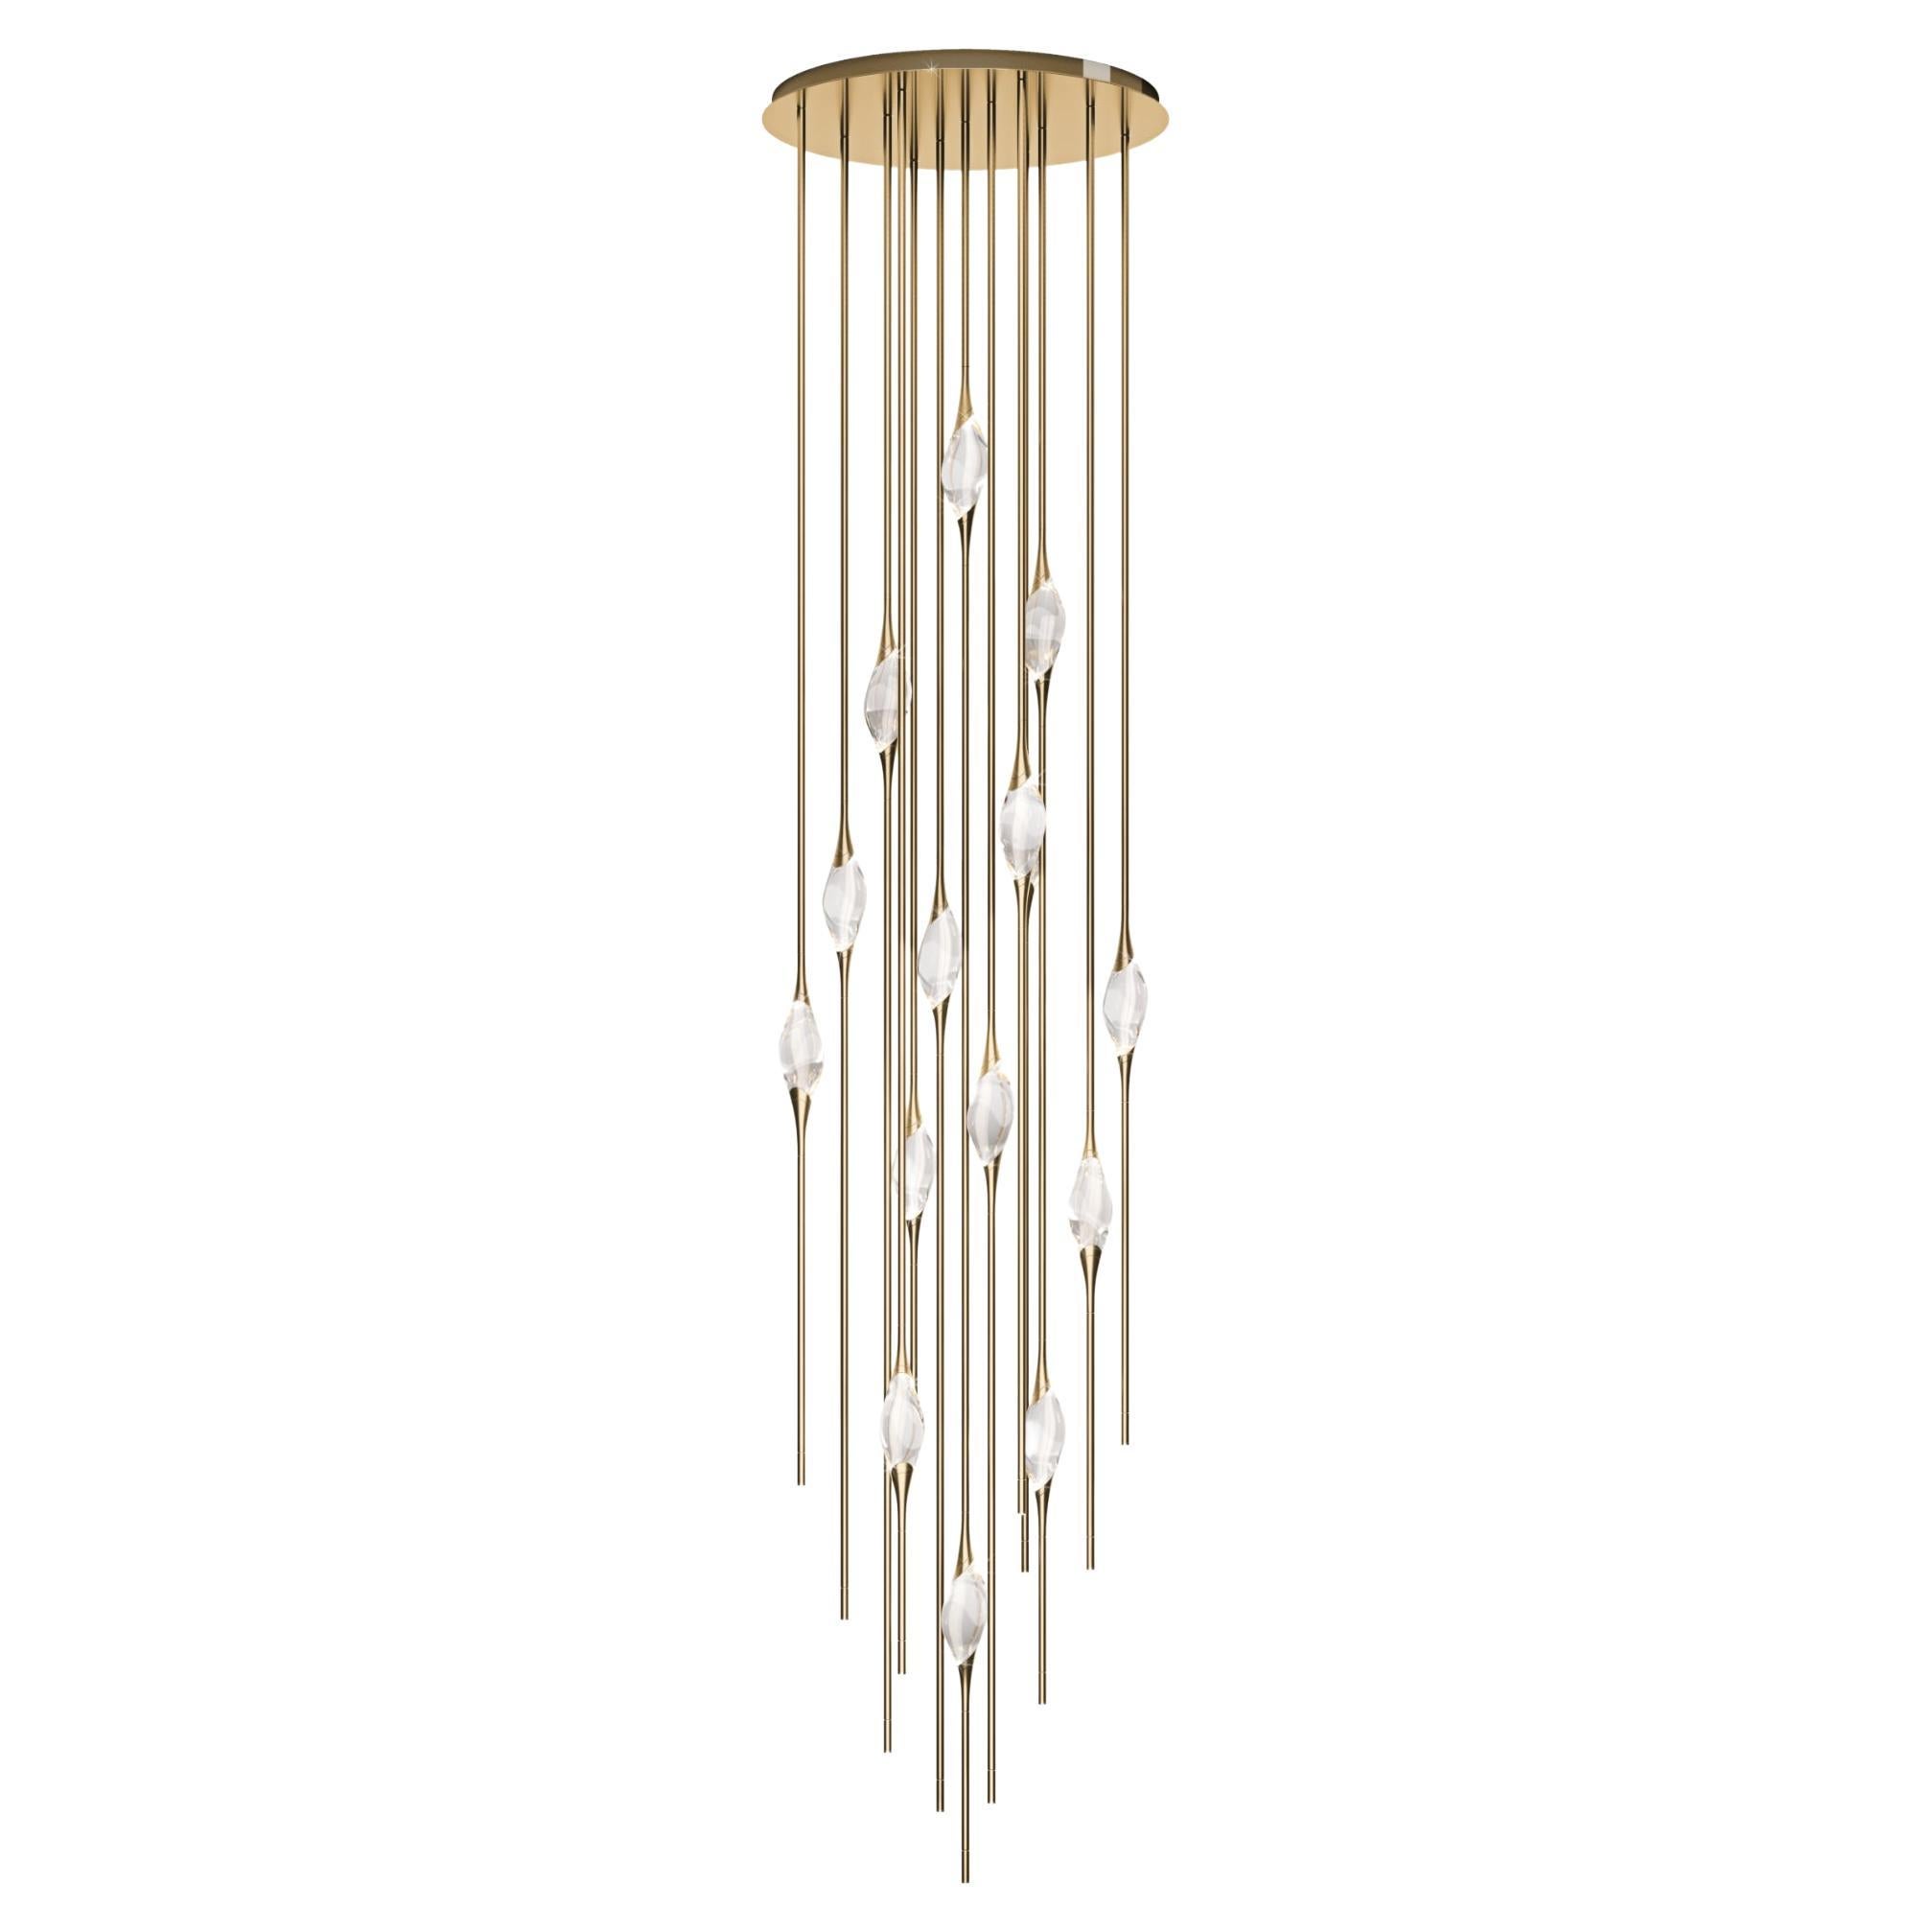 "Il Pezzo 12 Cluster Chandelier" - height 350cm/137" - polished brass - crystal